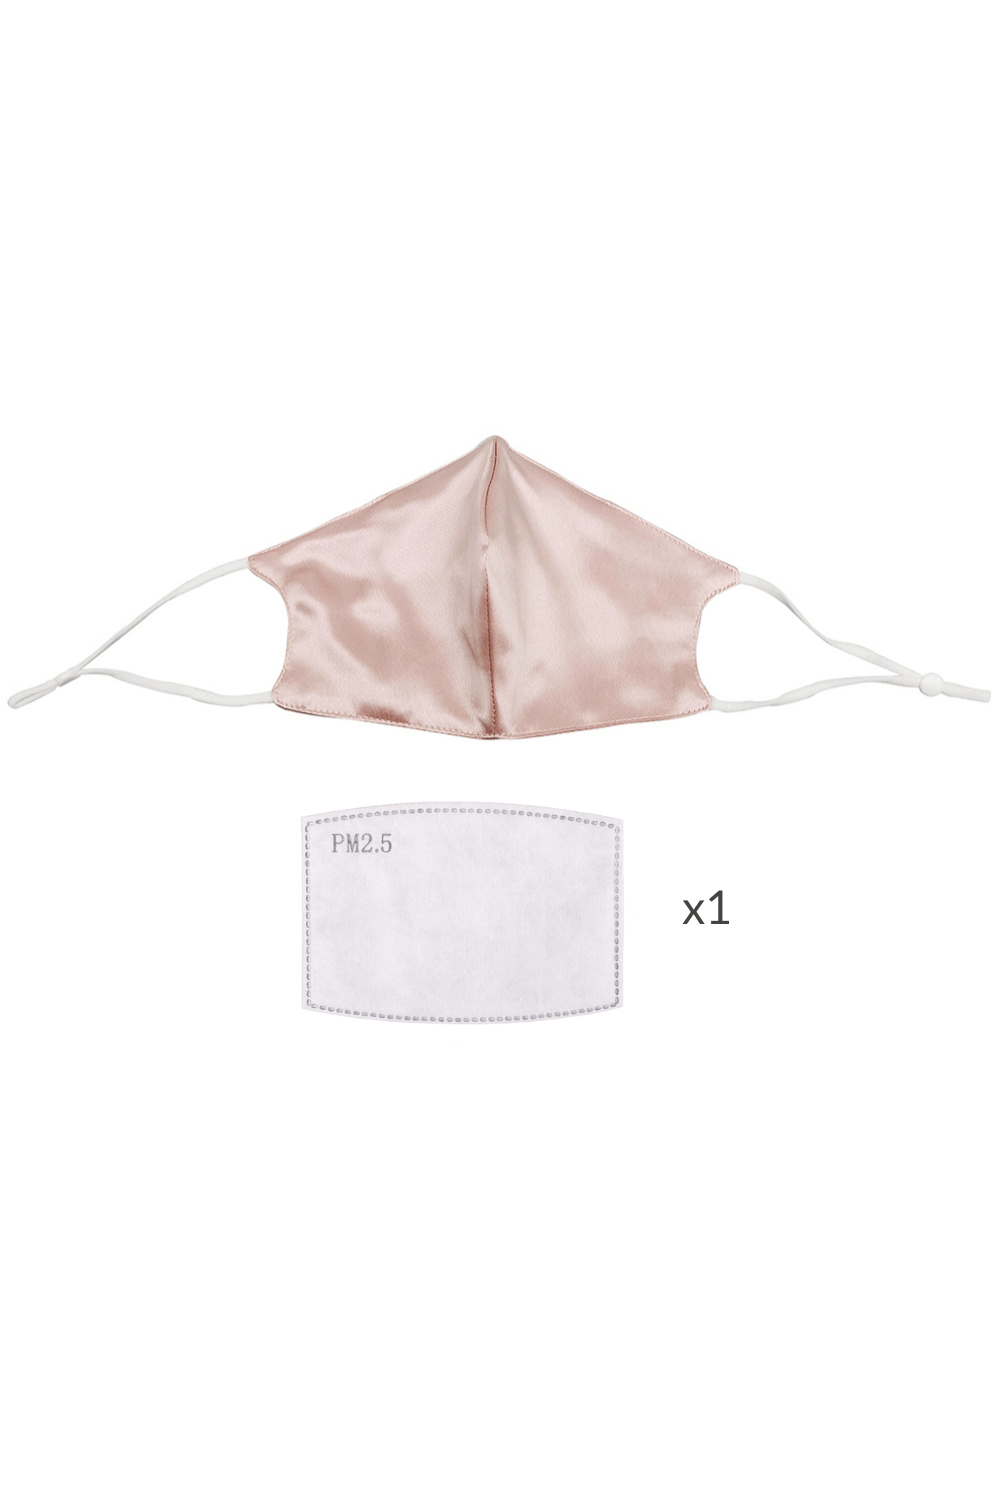 STELLAR Silk Face Mask - Pink (with Nose Wire and Filter Pocket) - BASK ™